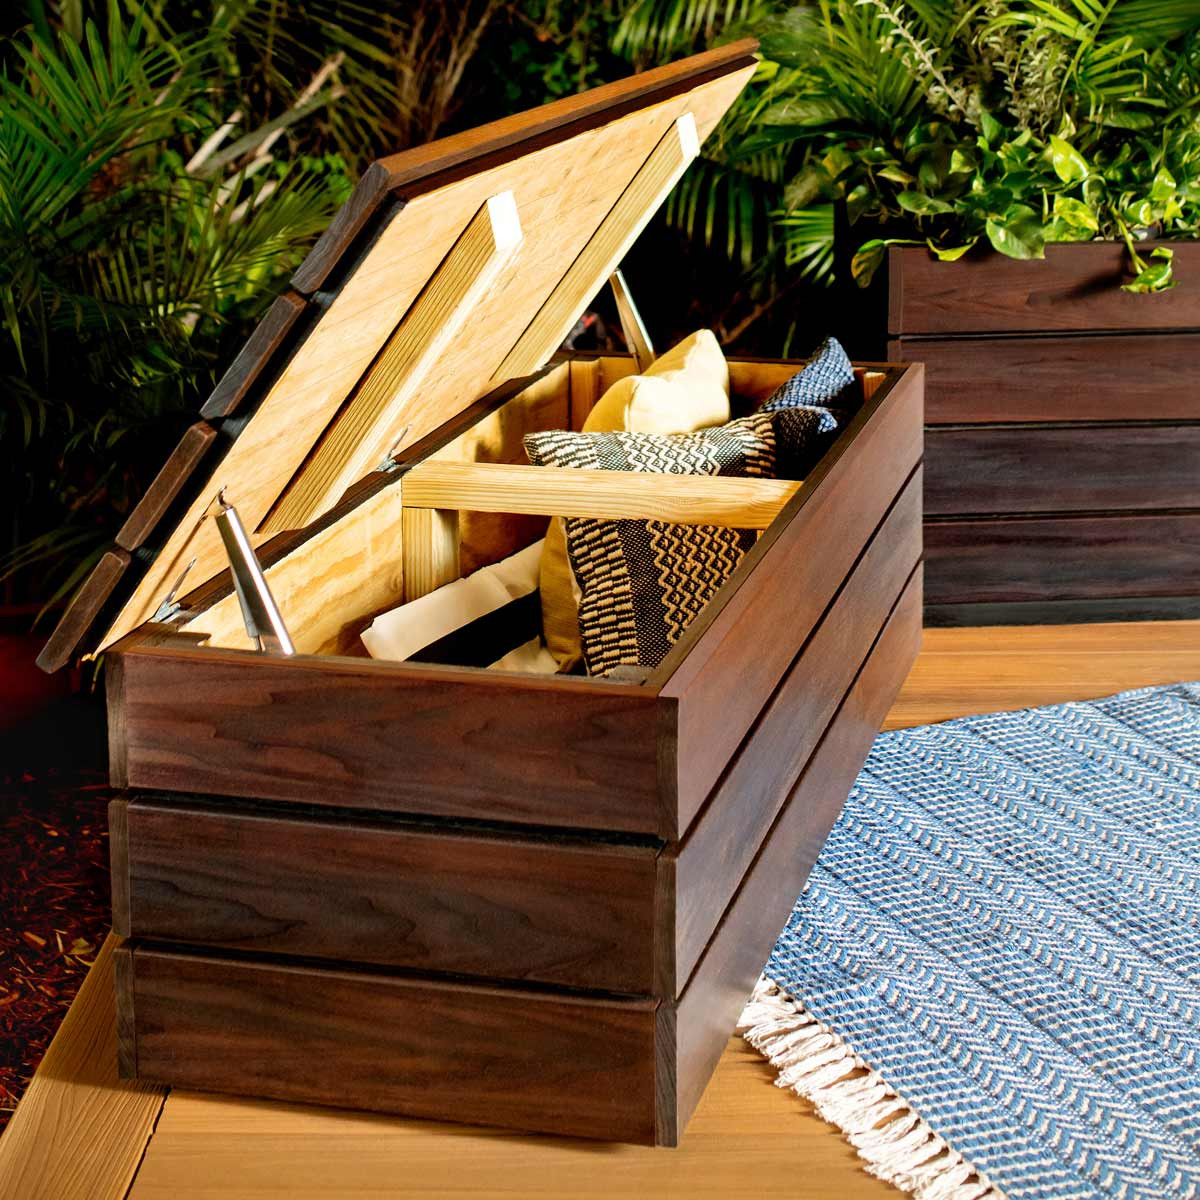 Storage Bench Outside
 How to Build an Outdoor Storage Bench